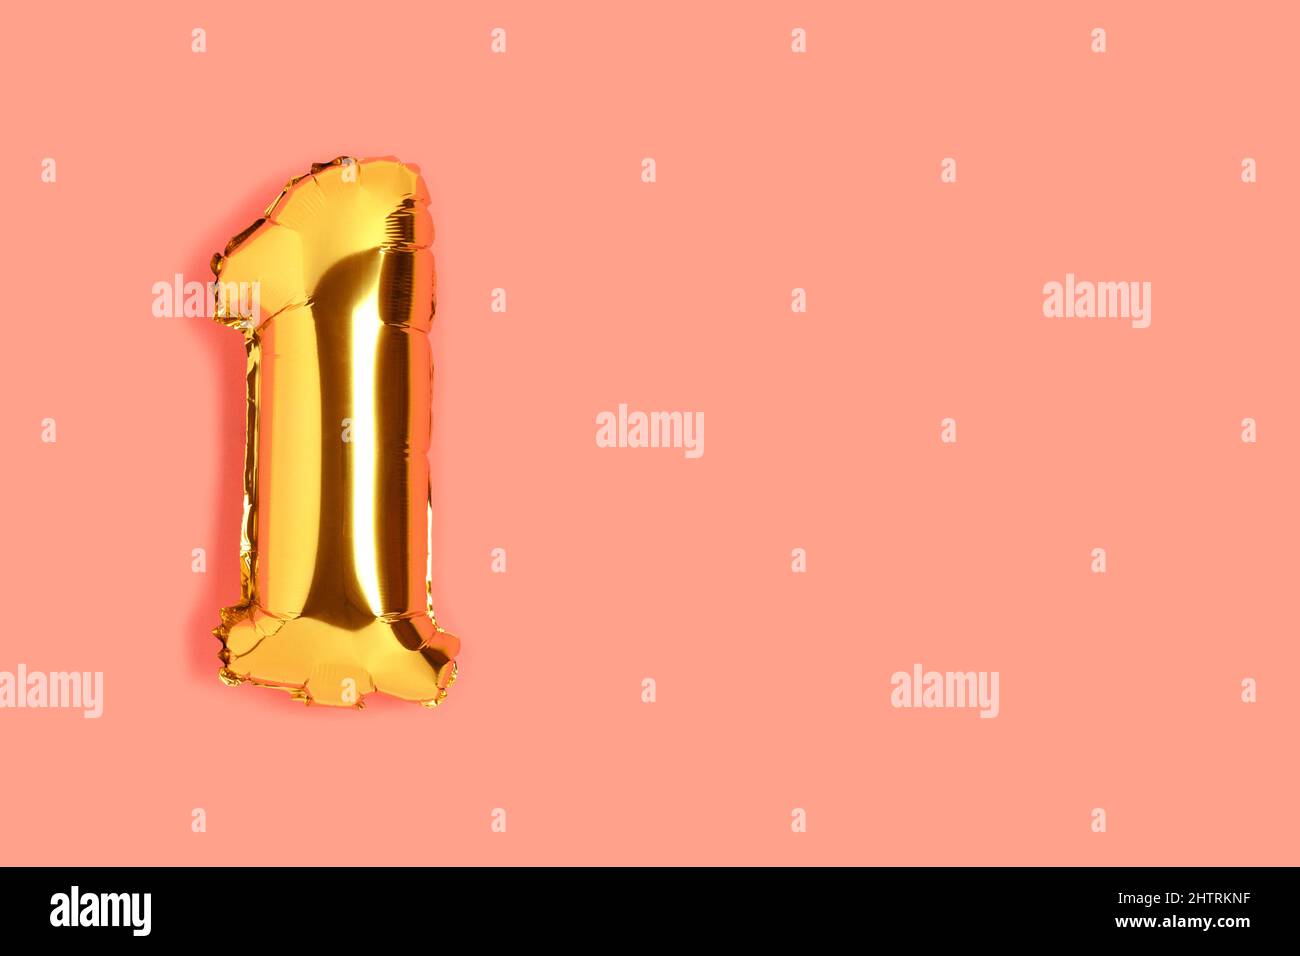 Number 1 golden balloon with copyspace. One year anniversary celebration concept on a coral colored background. Stock Photo